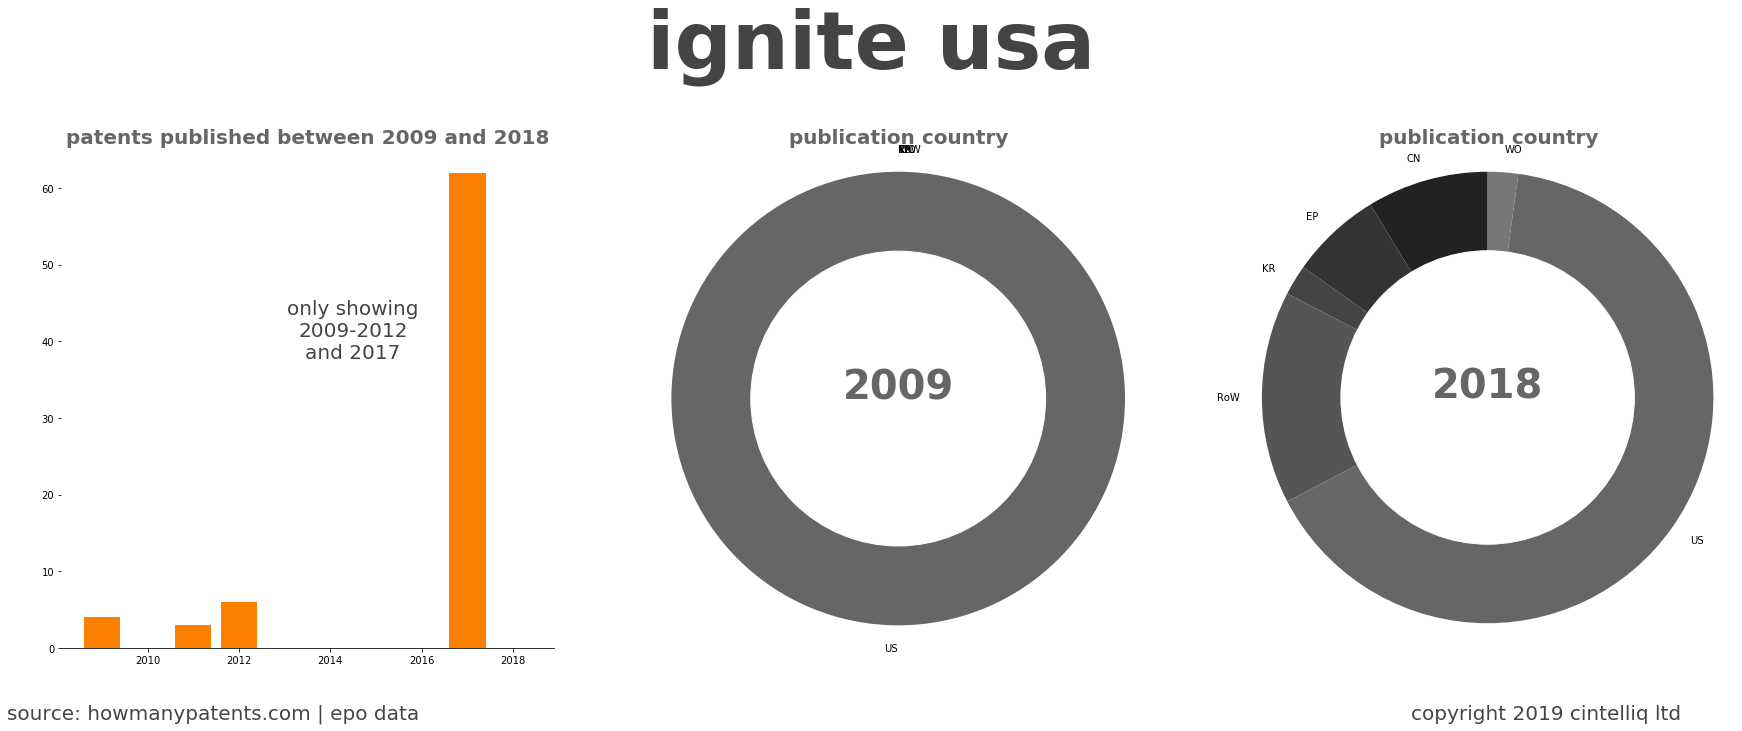 summary of patents for Ignite Usa